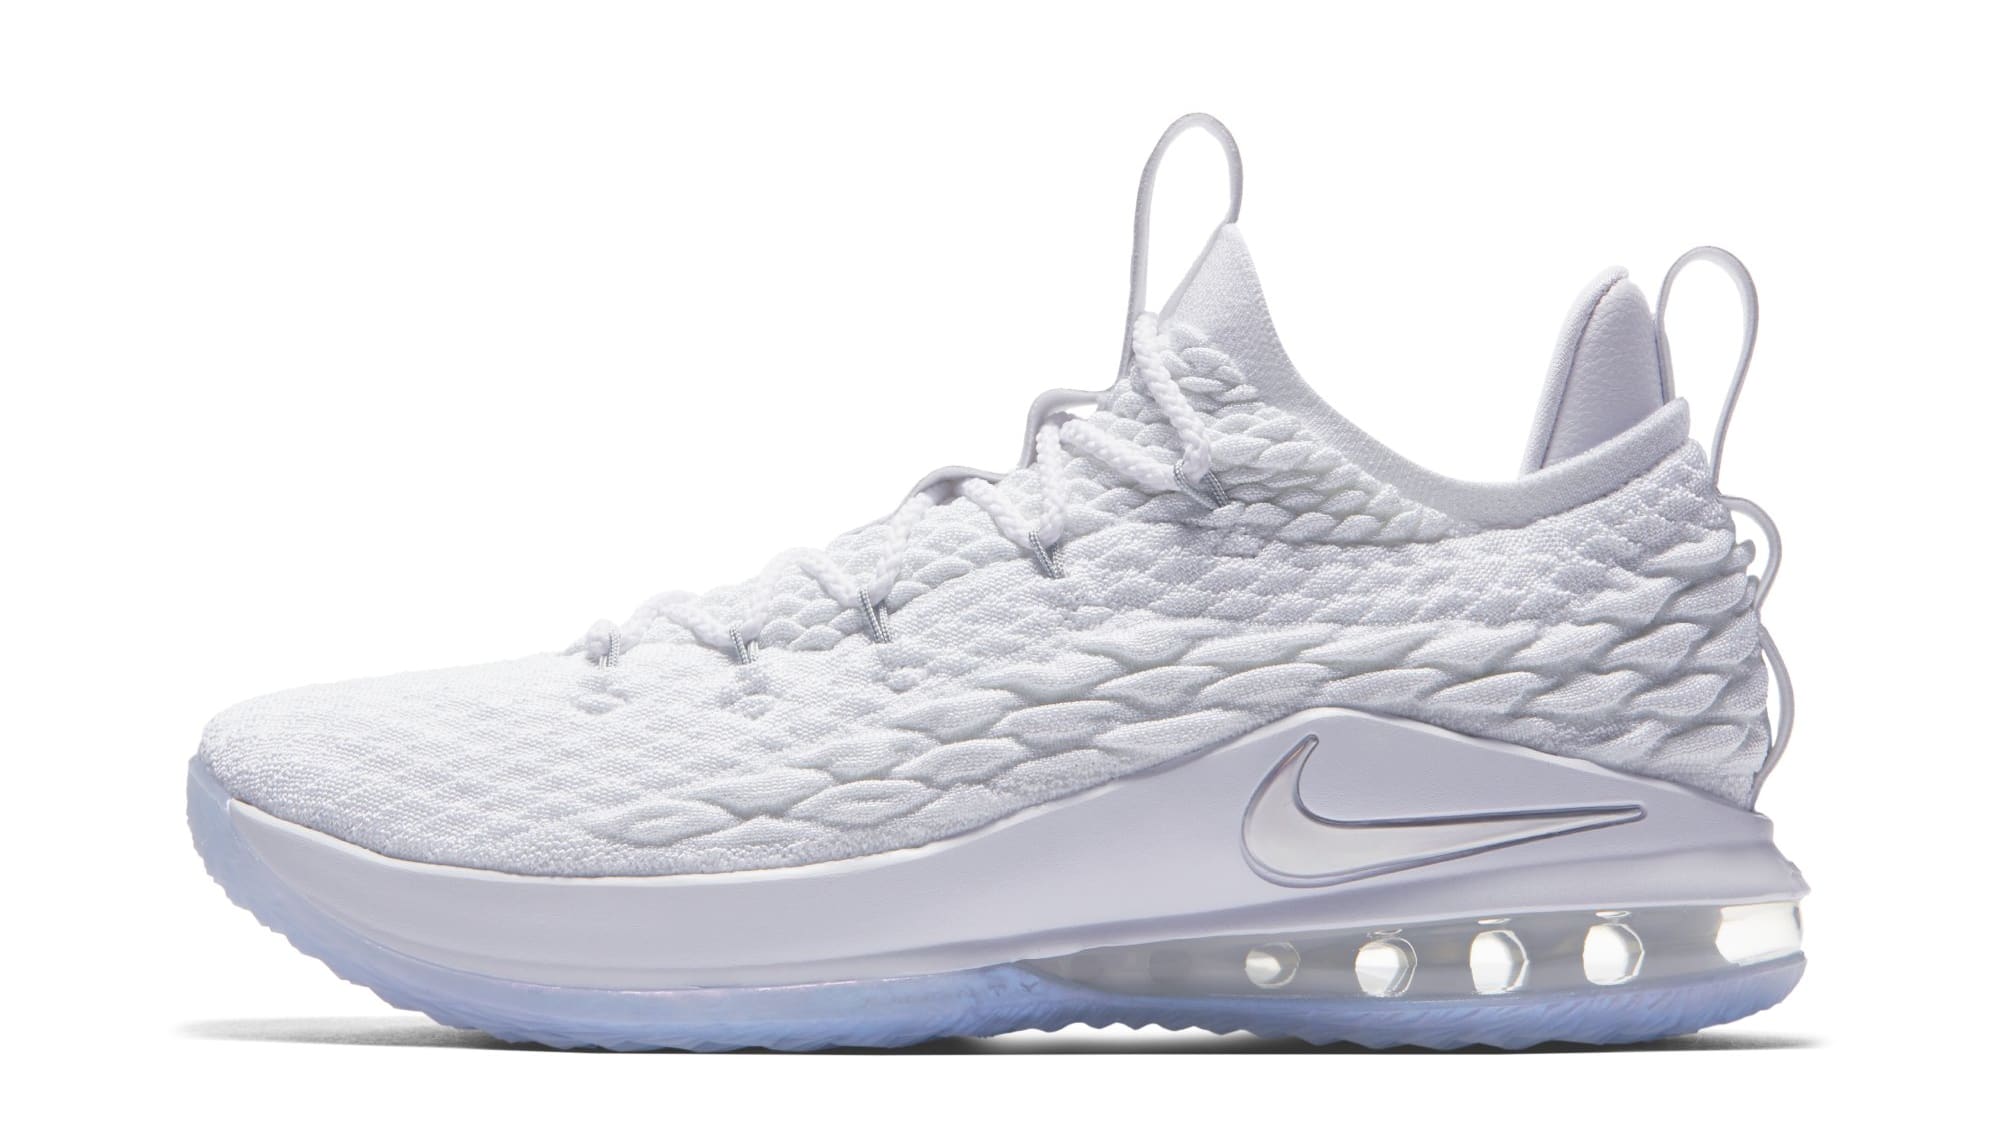 This Nike LeBron 15 Low for Complex